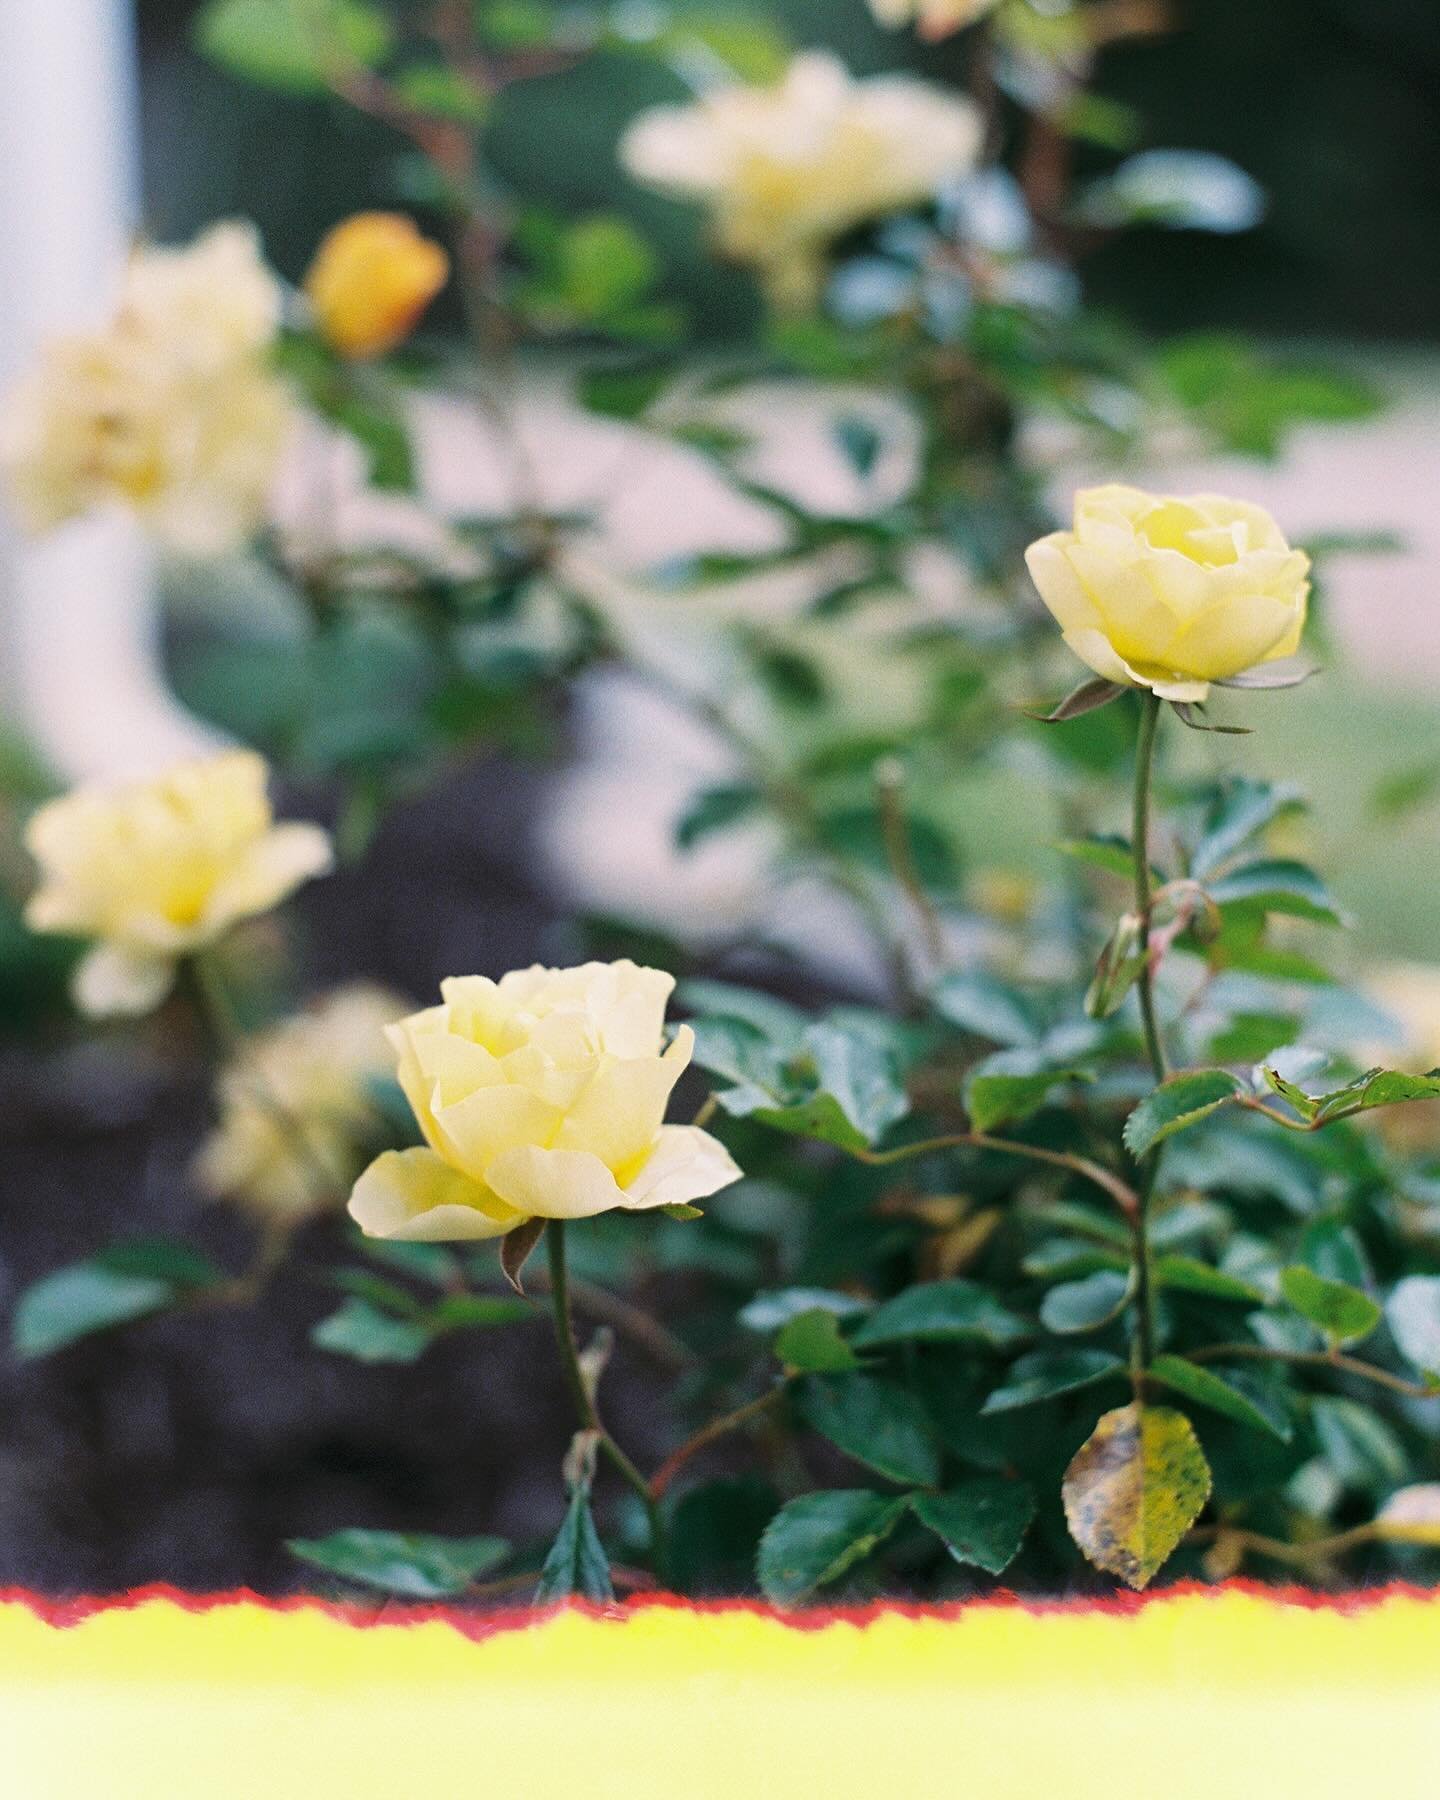 35mm film: A bit of what I&rsquo;ve been up to lately&hellip;

1. Our new and young yellow roses looking good and healthy. (What is the yellow strip on the bottom? I opened the back of the camera way too soon before I had the roll completely rolled u